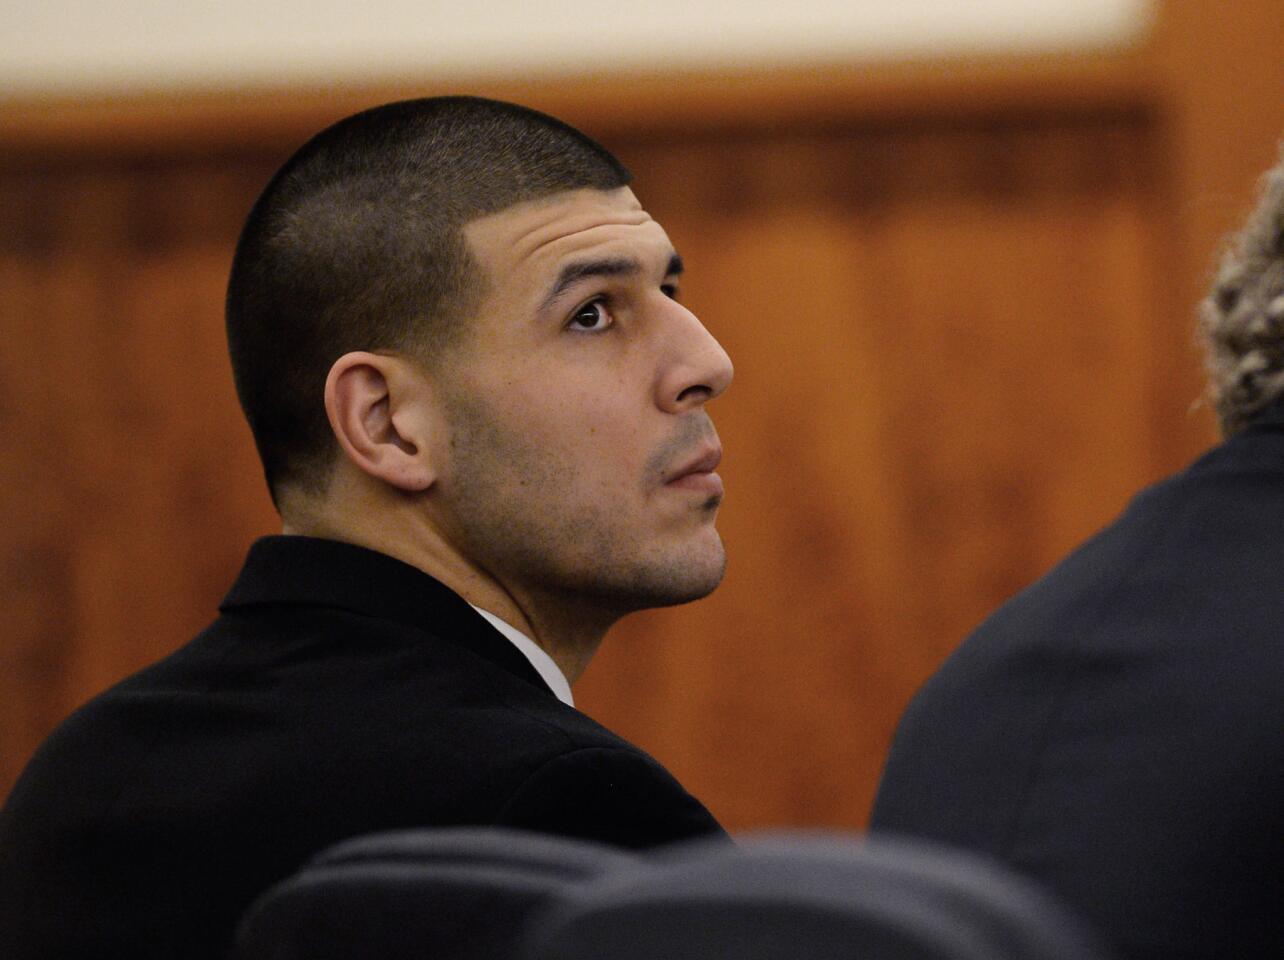 The 25-year-old was a star player with the Patriots with a $40 million contract when, prosecutors say, he killed Odin Lloyd. Hernandez has pleaded not guilty. He has also pleaded not guilty to murder charges stemming from a 2012 double slaying in Boston, where he is accused of killing two men after someone accidentally spilled a drink on him at a nightclub. No trial date is set in the Boston case, and prosecutors in the Lloyd case will not be allowed to tell the jury about the double slaying. - Associated Press